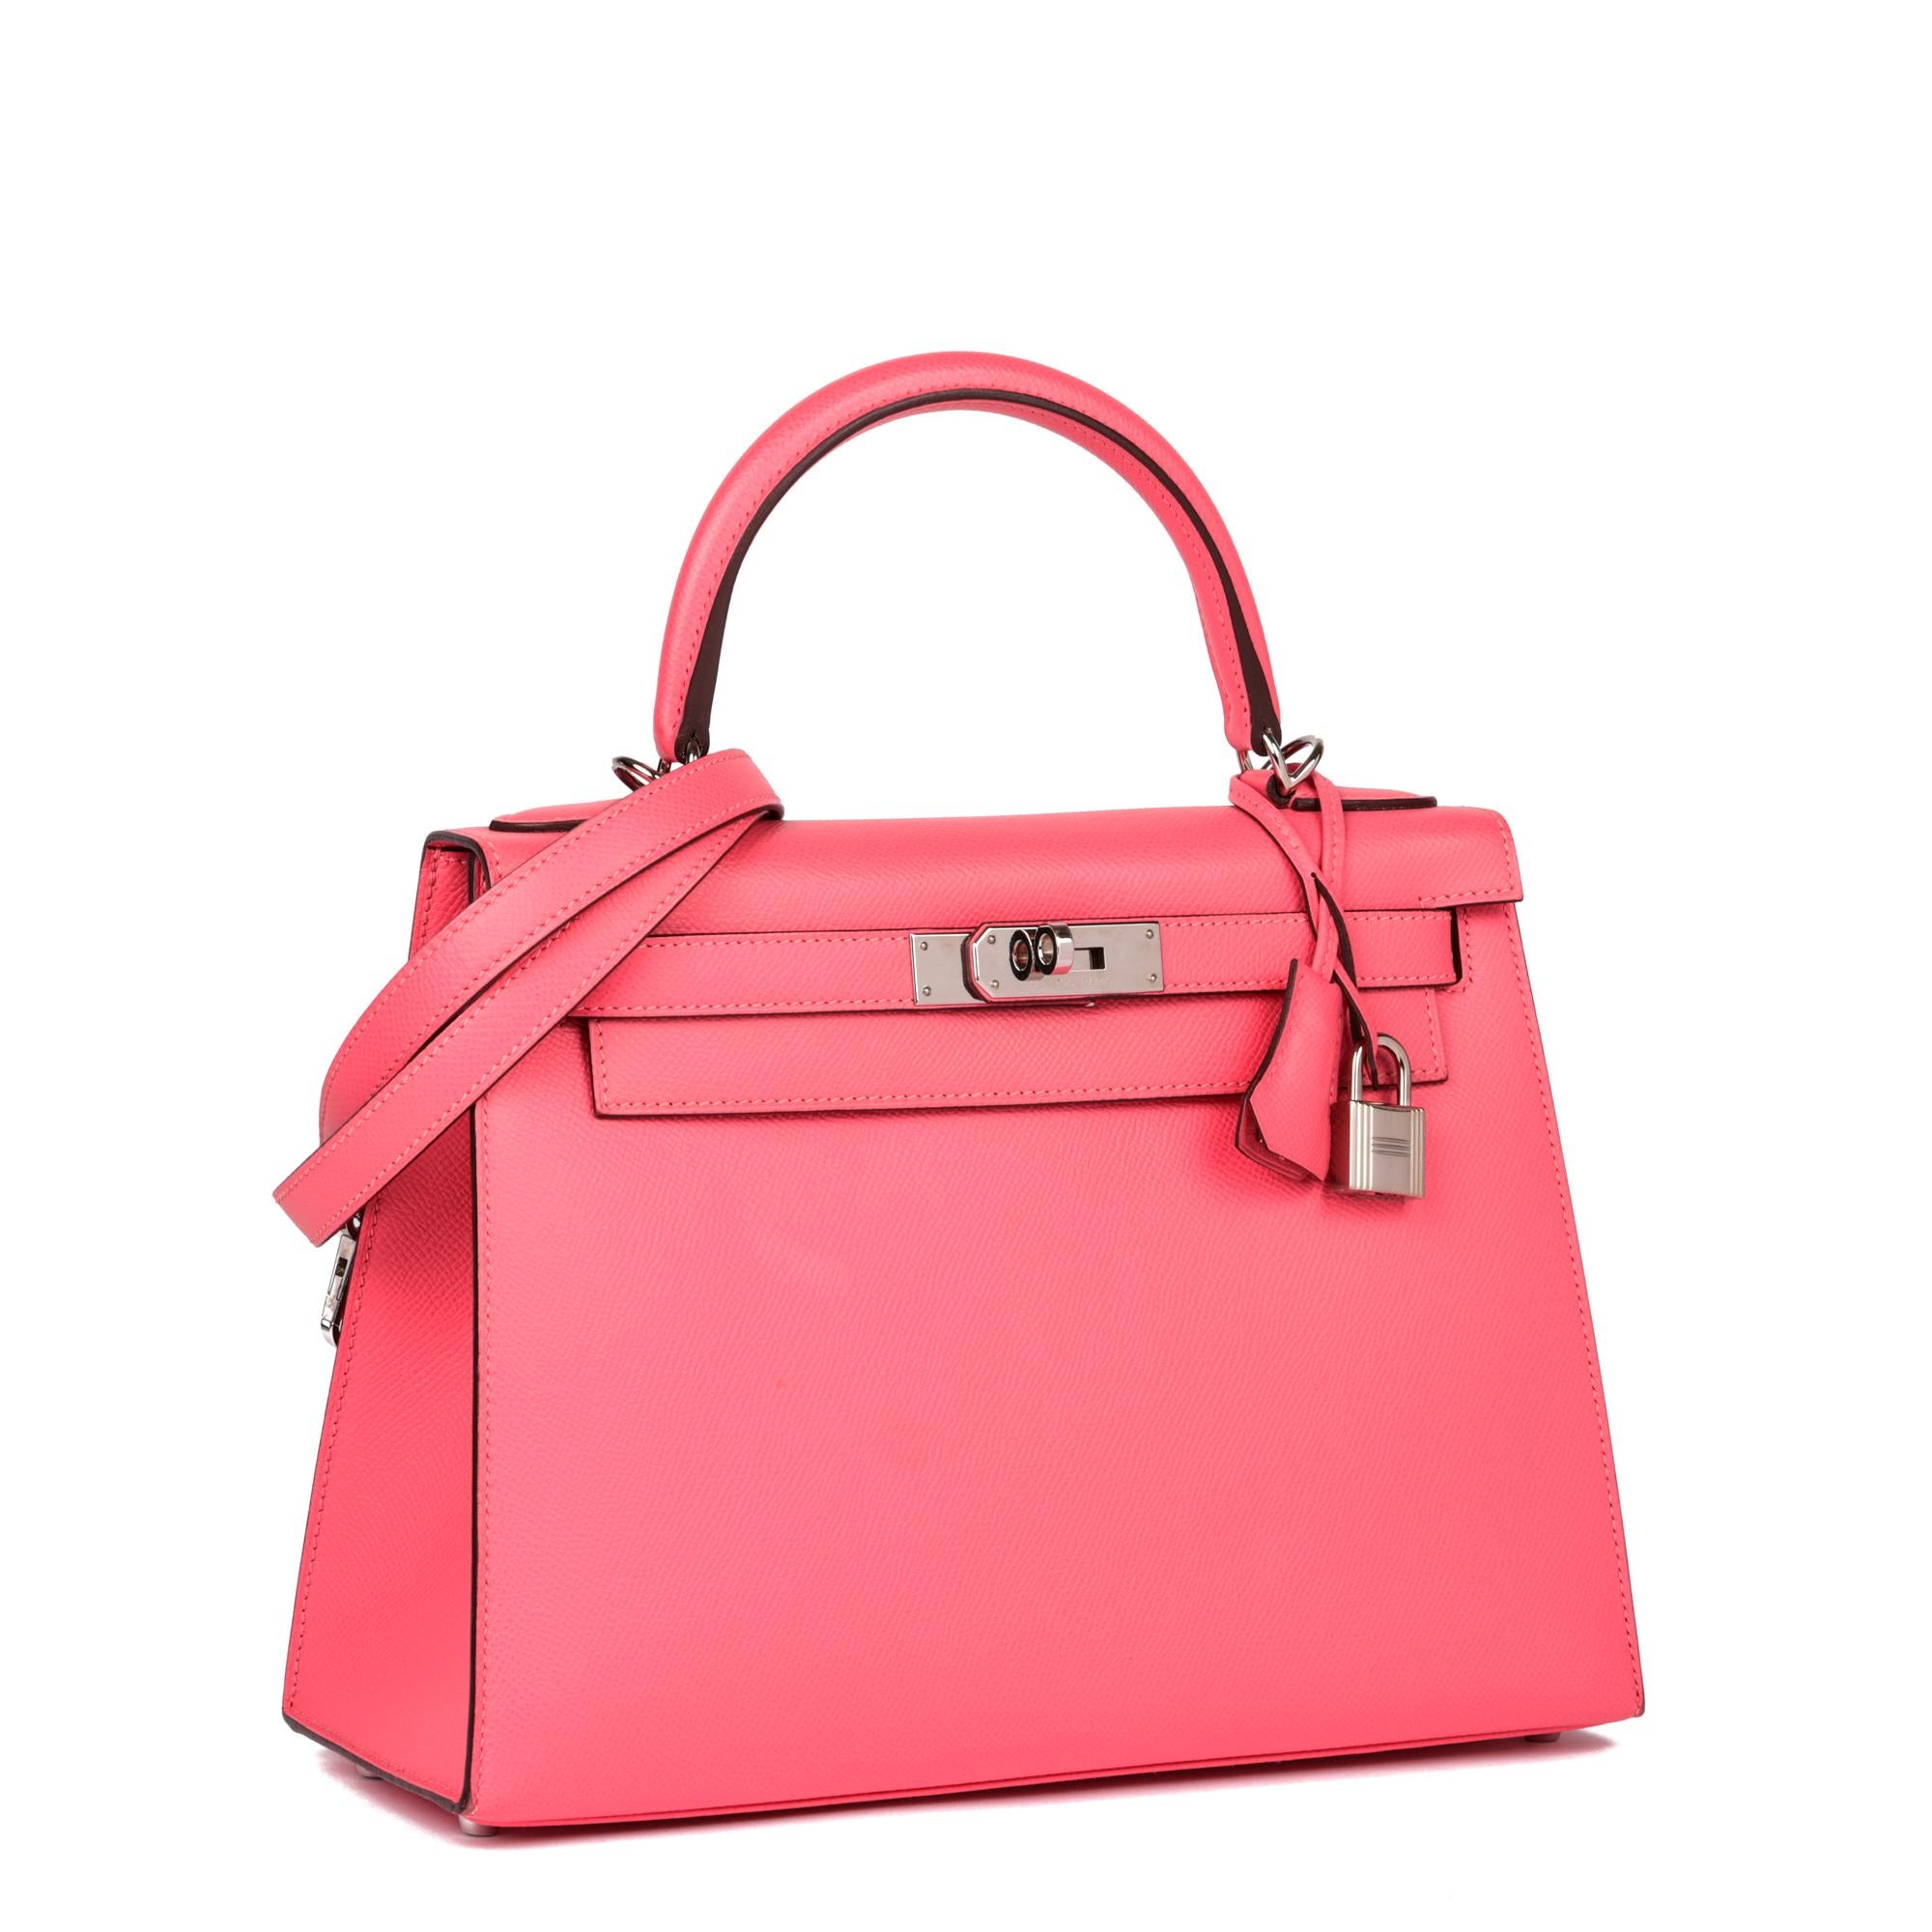 HERMÈS
Rose Azalee Epsom Leather Kelly 28cm Sellier

Xupes Reference: CB869
Serial Number: D
Age (Circa): 2019
Accompanied By: Hermès Dust Bag, Box, Padlock, Keys, Clochette, Rain Cover, Care Booklet, Shoulder Strap 
Authenticity Details: Date Stamp